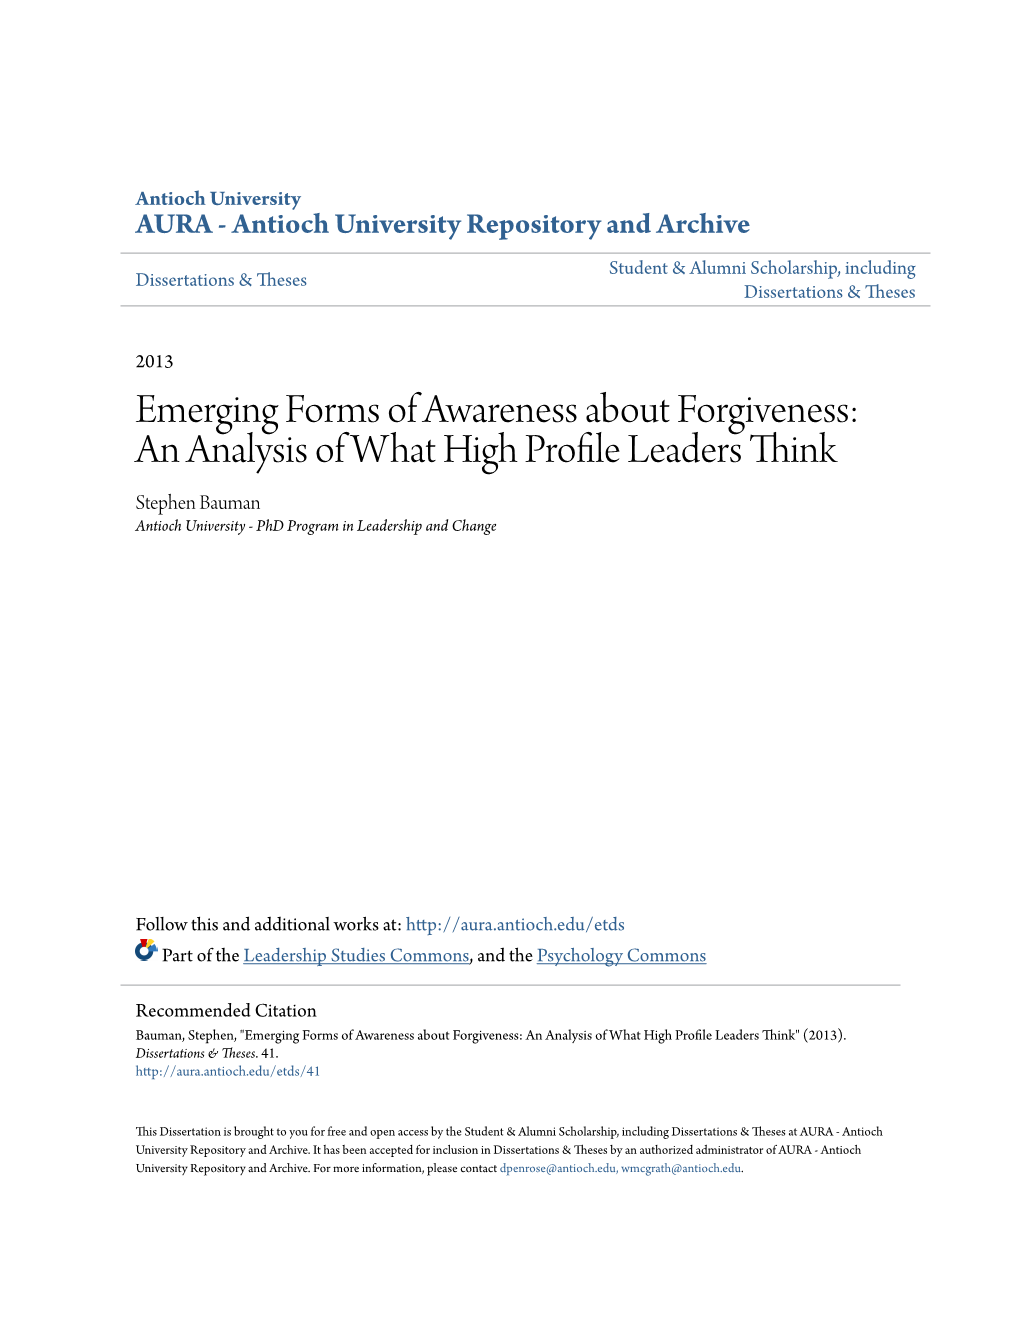 Emerging Forms of Awareness About Forgiveness: an Analysis of What High Profile Leaders Think Stephen Bauman Antioch University - Phd Program in Leadership and Change